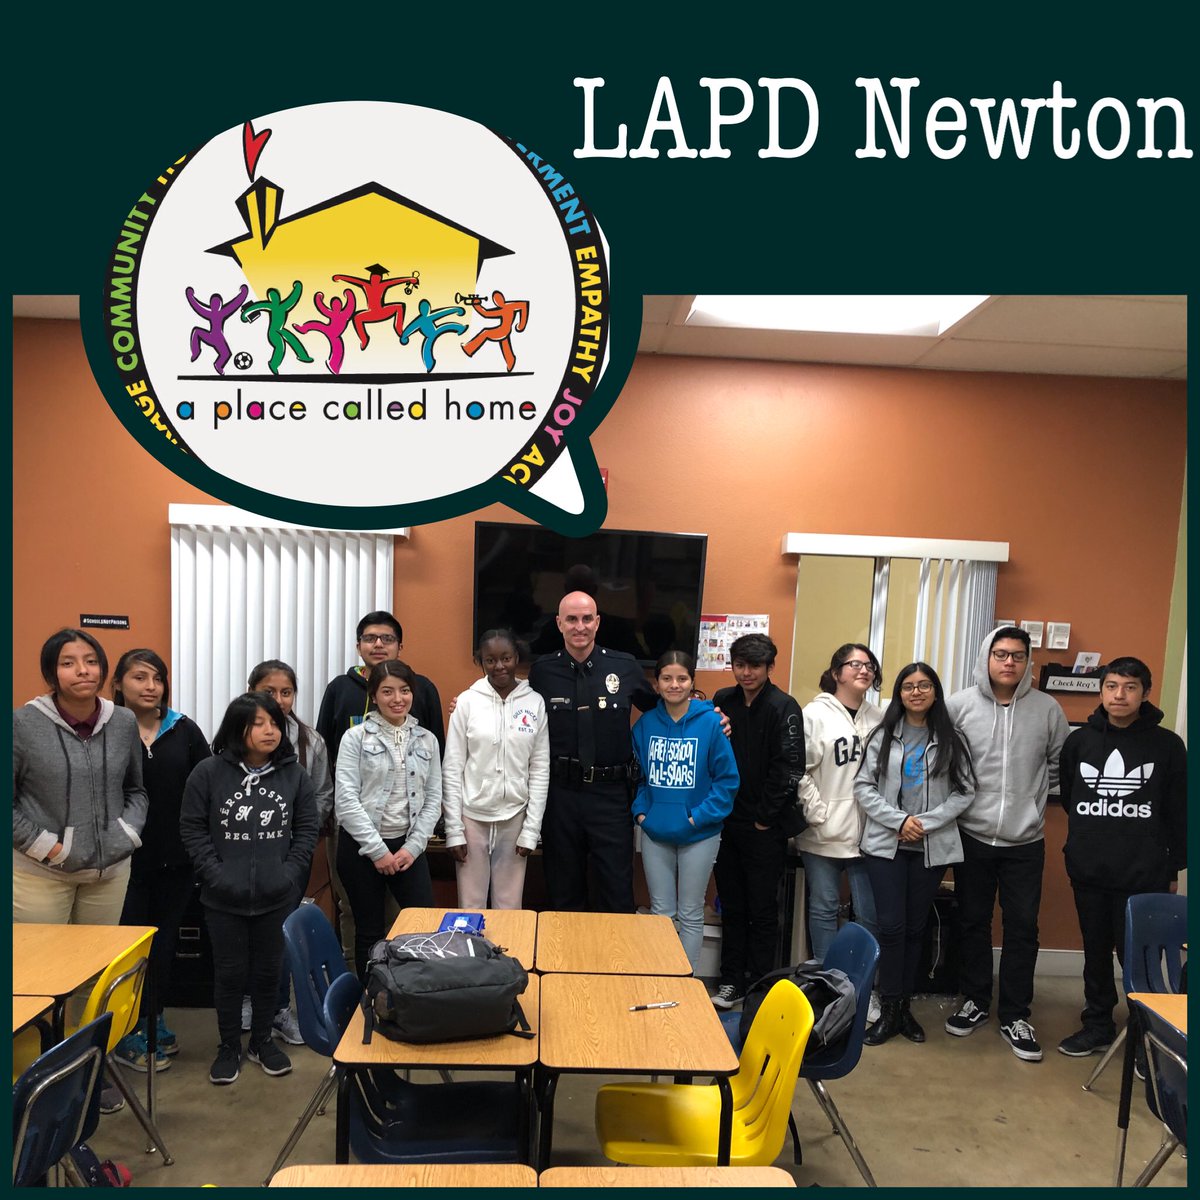 Our youth being educated on leadership, immigration and the culture of LAPD at @apch2830 #TeachingOurYouth #Inspiring #LAPD #Newton @LAPD_ARCOS